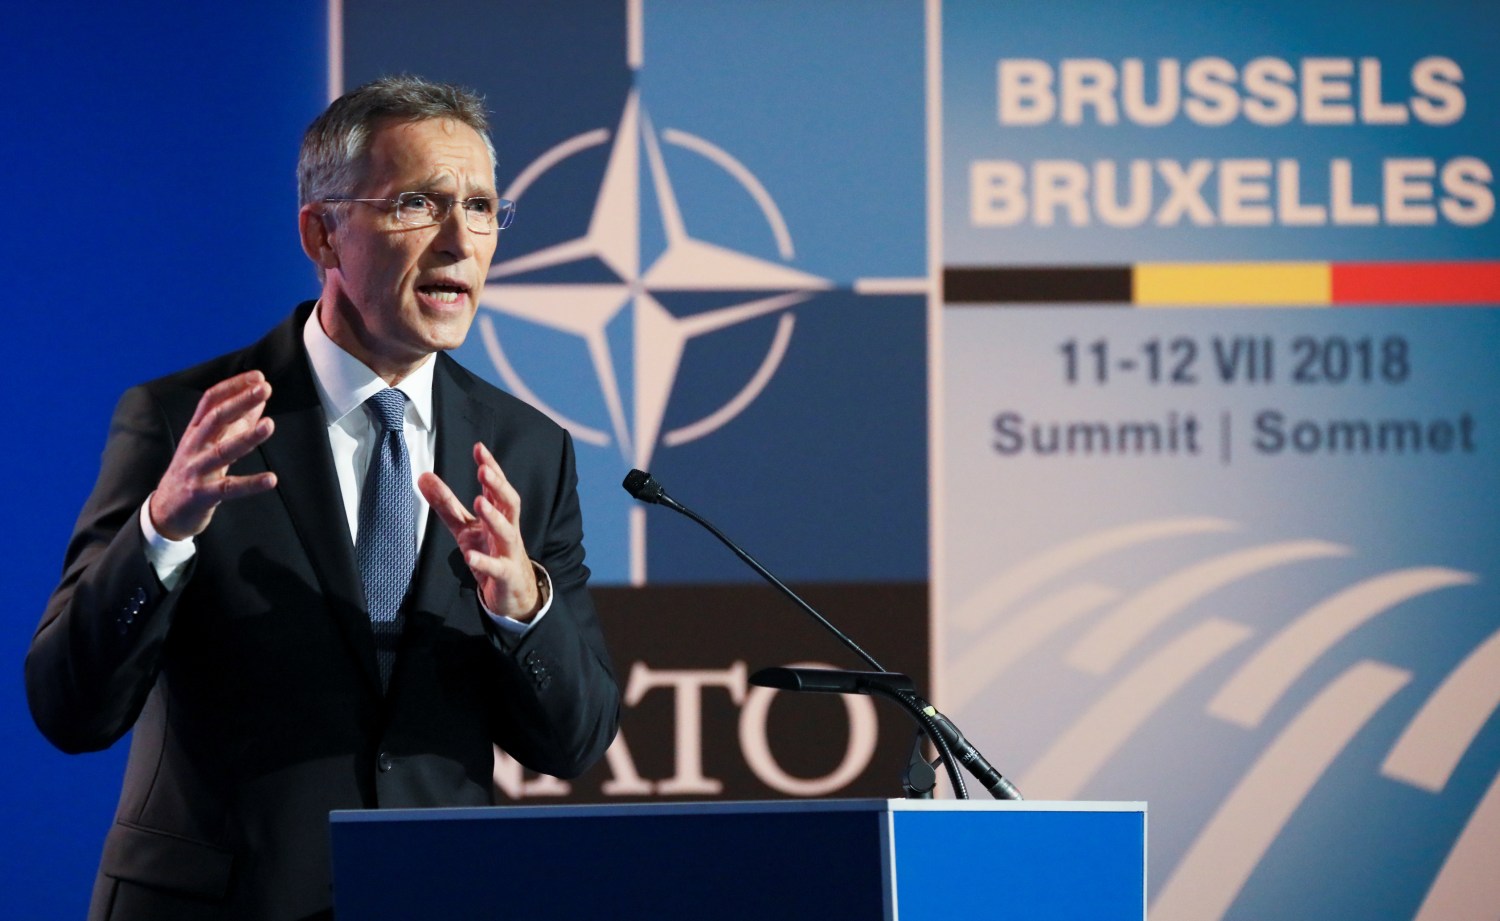 NATO Secretary General Jens Stoltenberg gestures as he gives a news conference ahead of a summit that will gather leaders of the 29 alliance members in Brussels, Belgium, July 10 2018. REUTERS/Reinhard Krause - RC14D4F06960